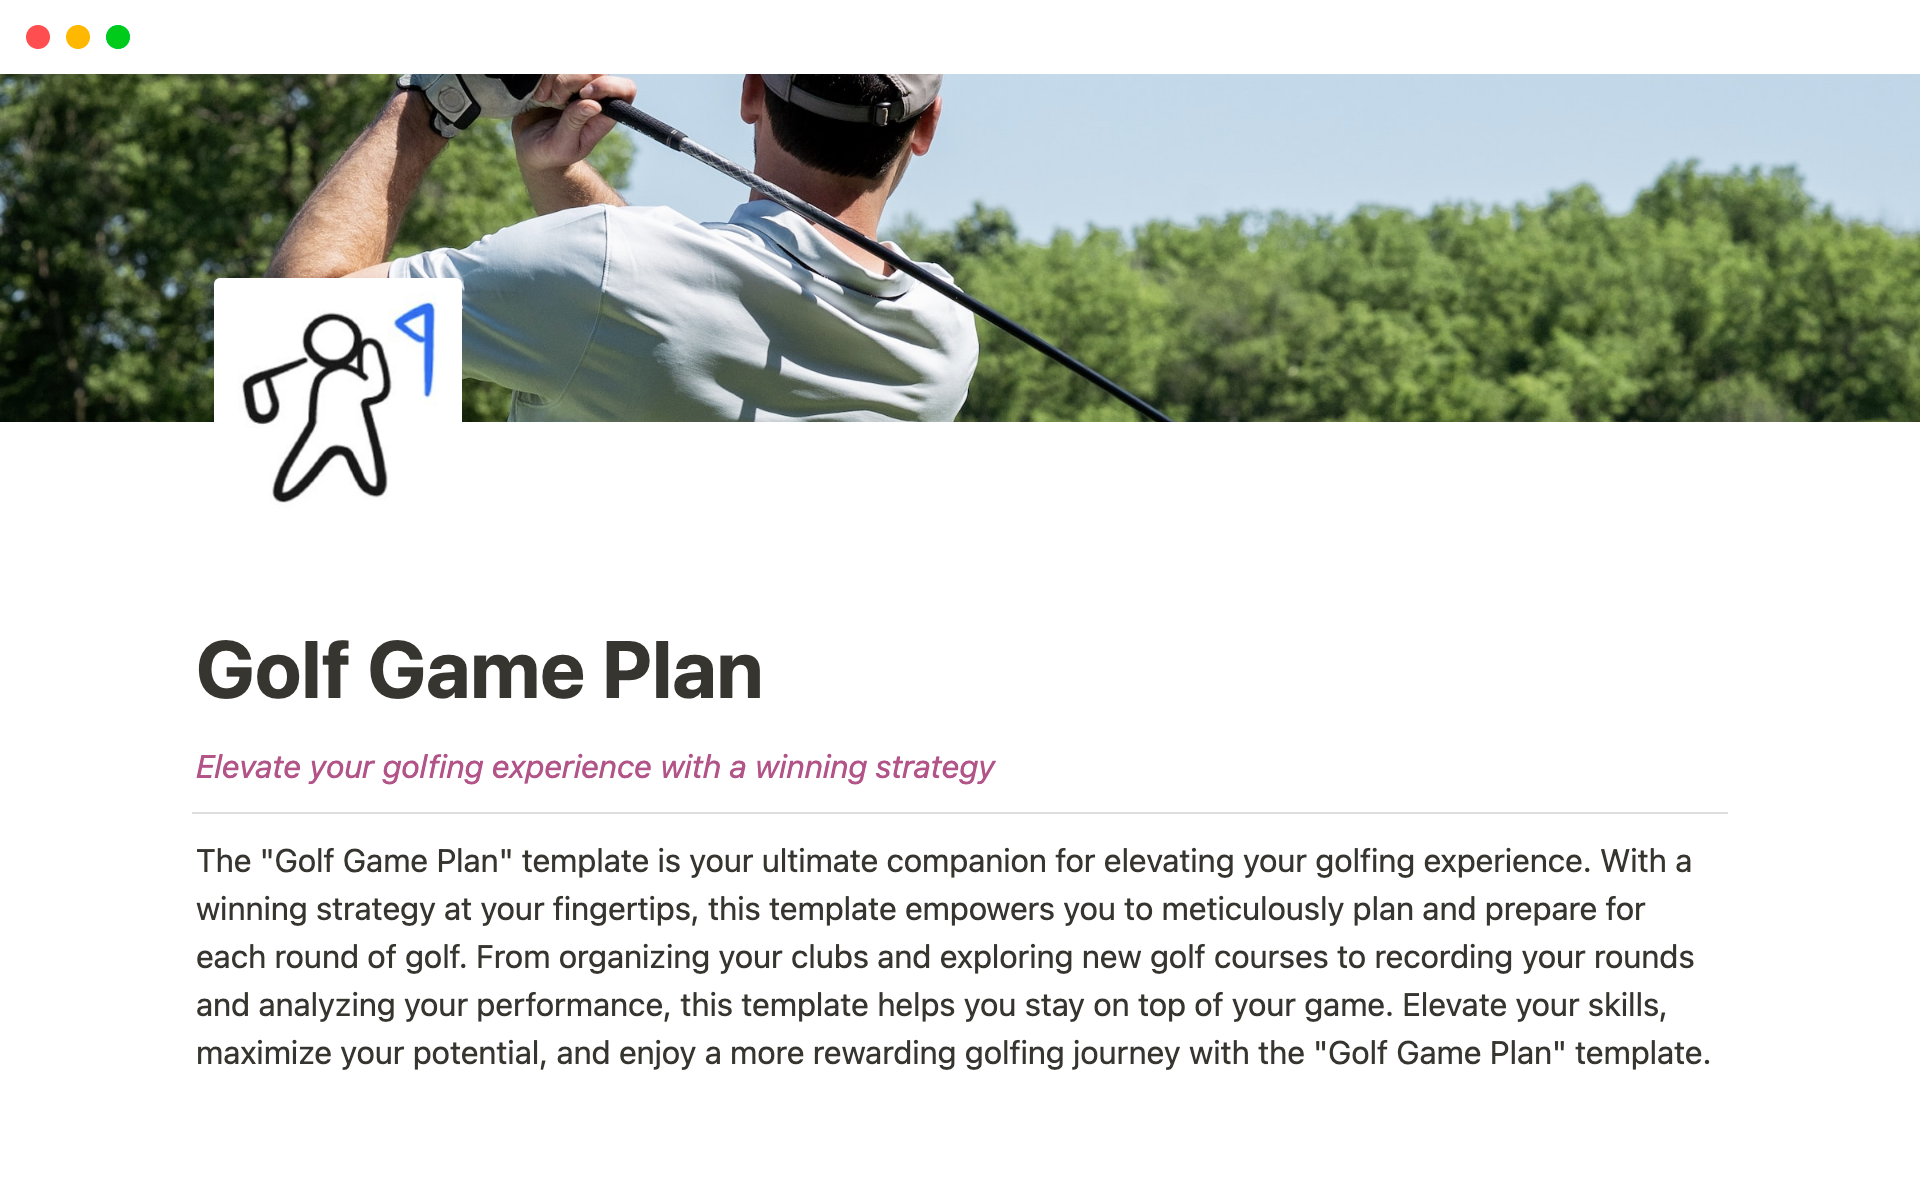 The "Golf Game Plan" template provides golfers with a comprehensive toolkit to organize, strategize, and track their golfing journey, from managing clubs and exploring courses to recording and analyzing round results.